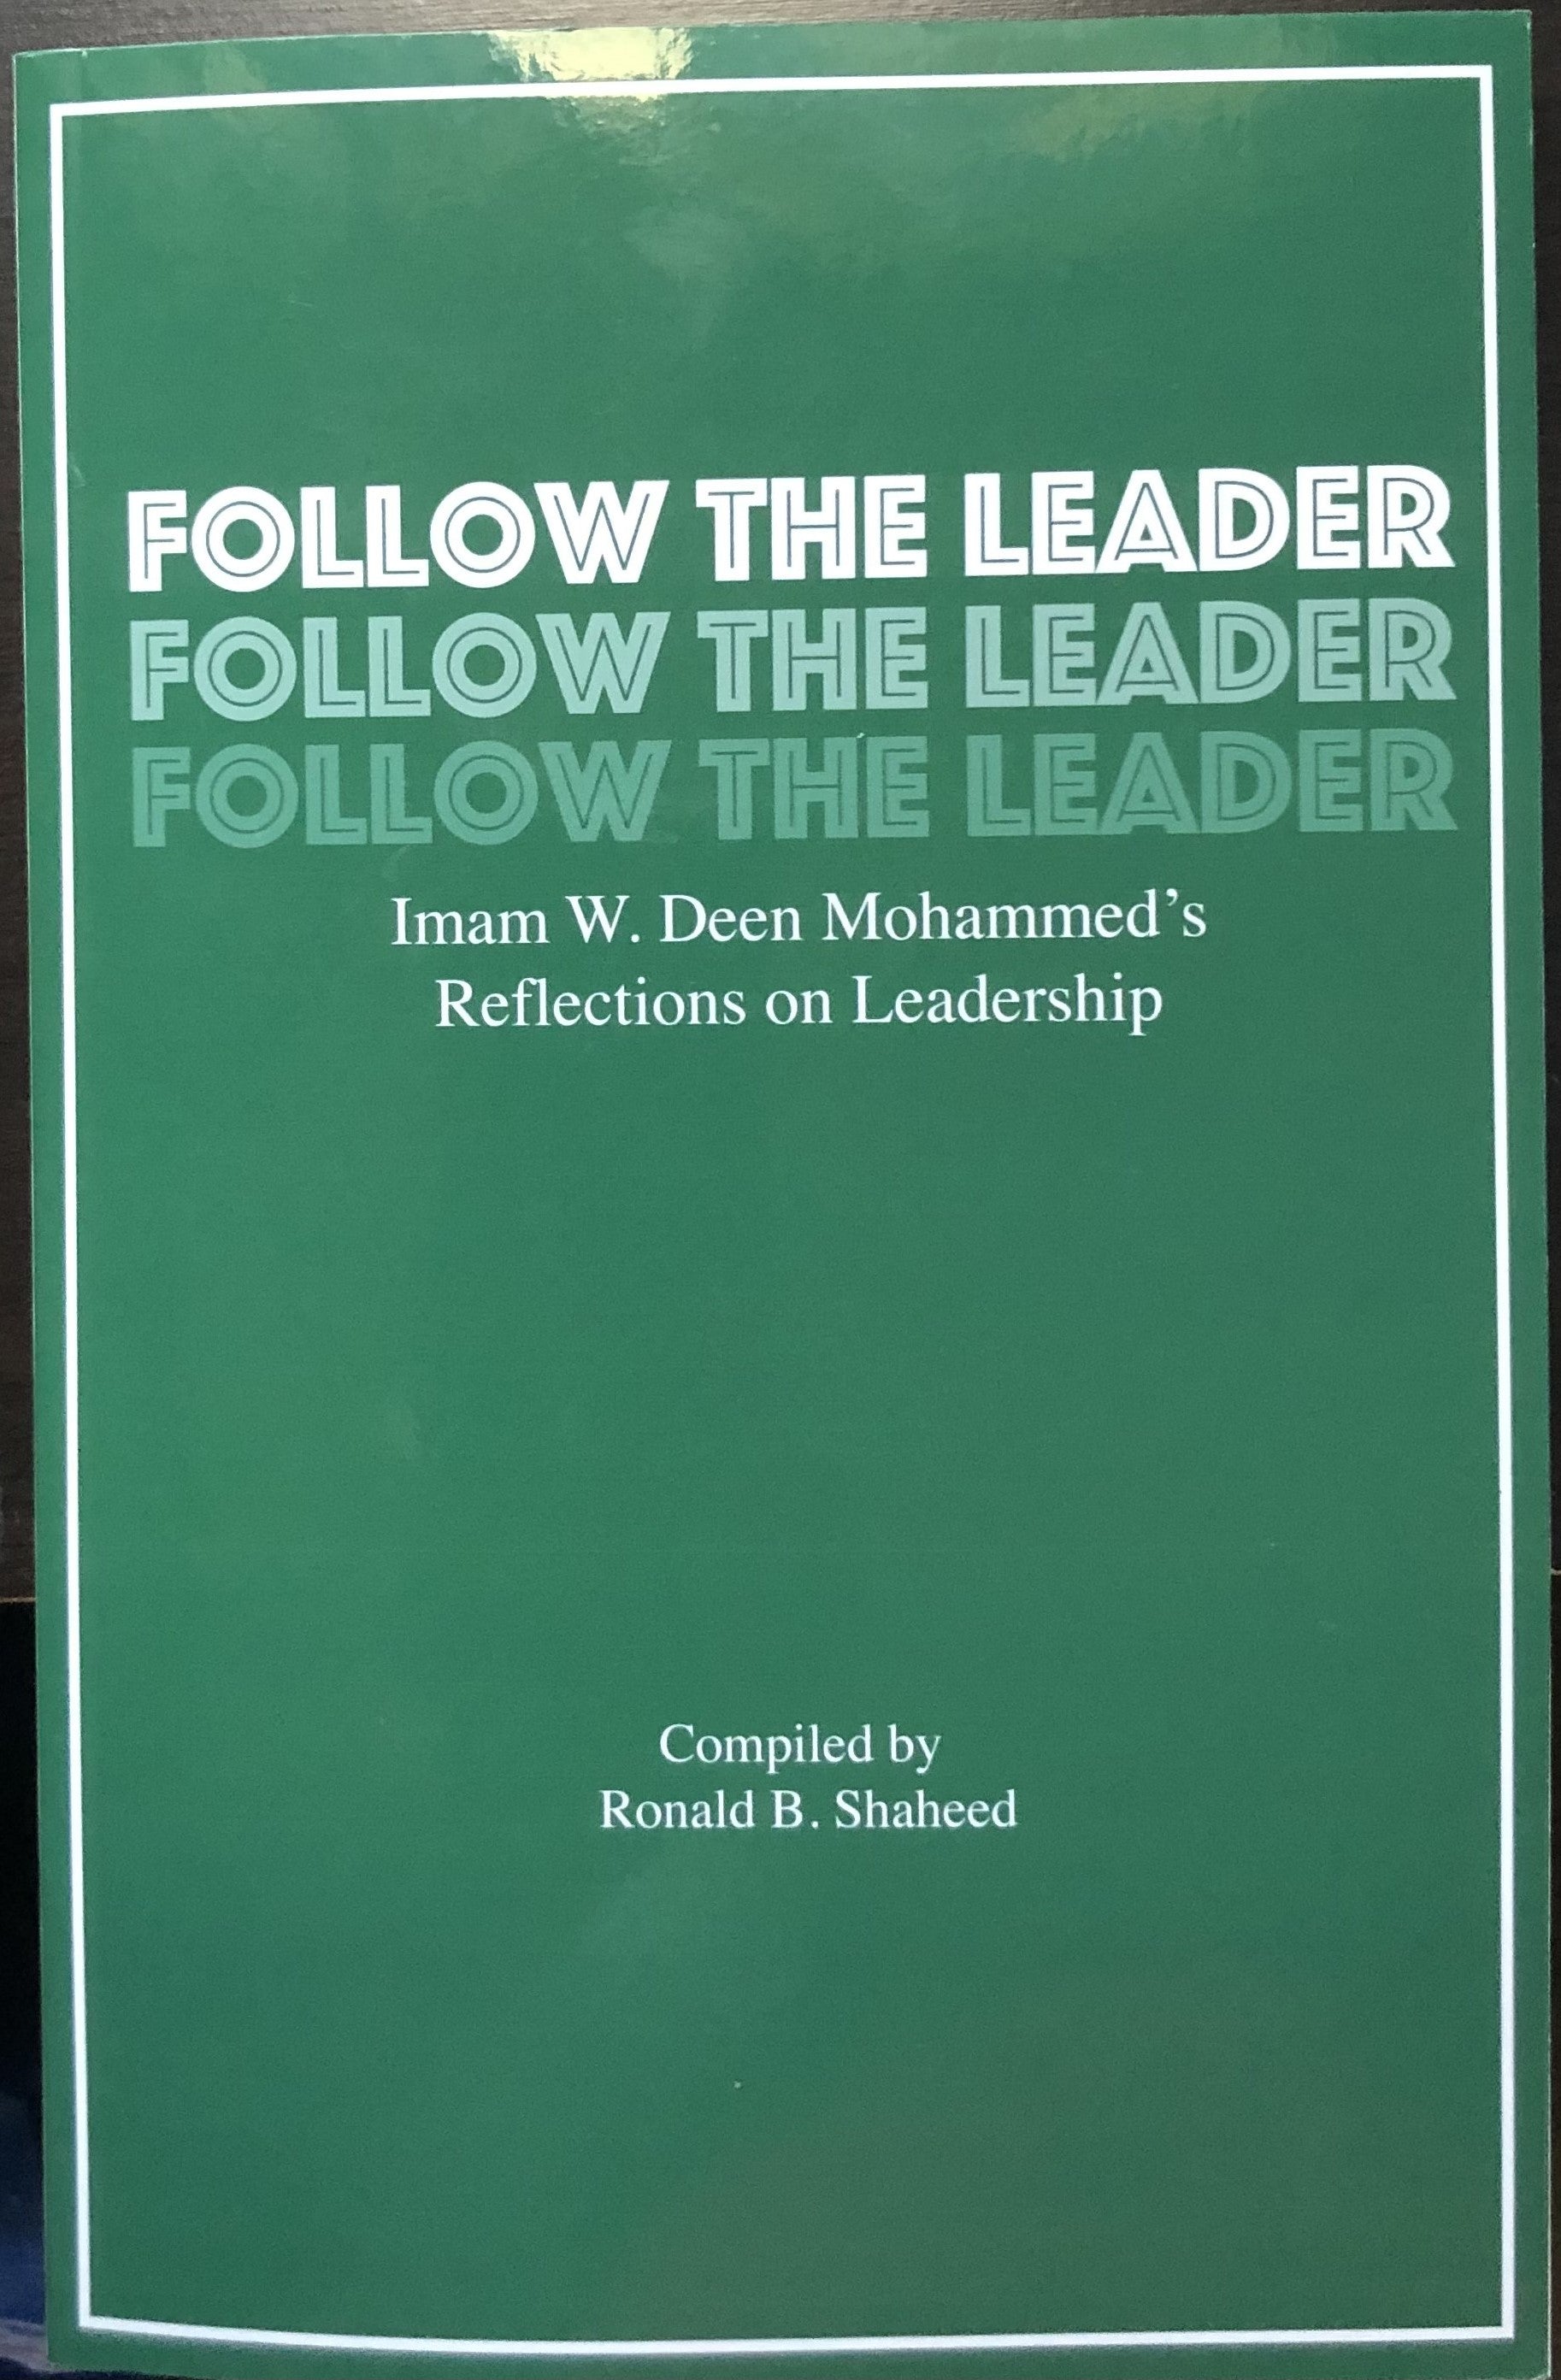 Follow the Leader: Imam W. Deen Mohammed's Reflections on Leadership